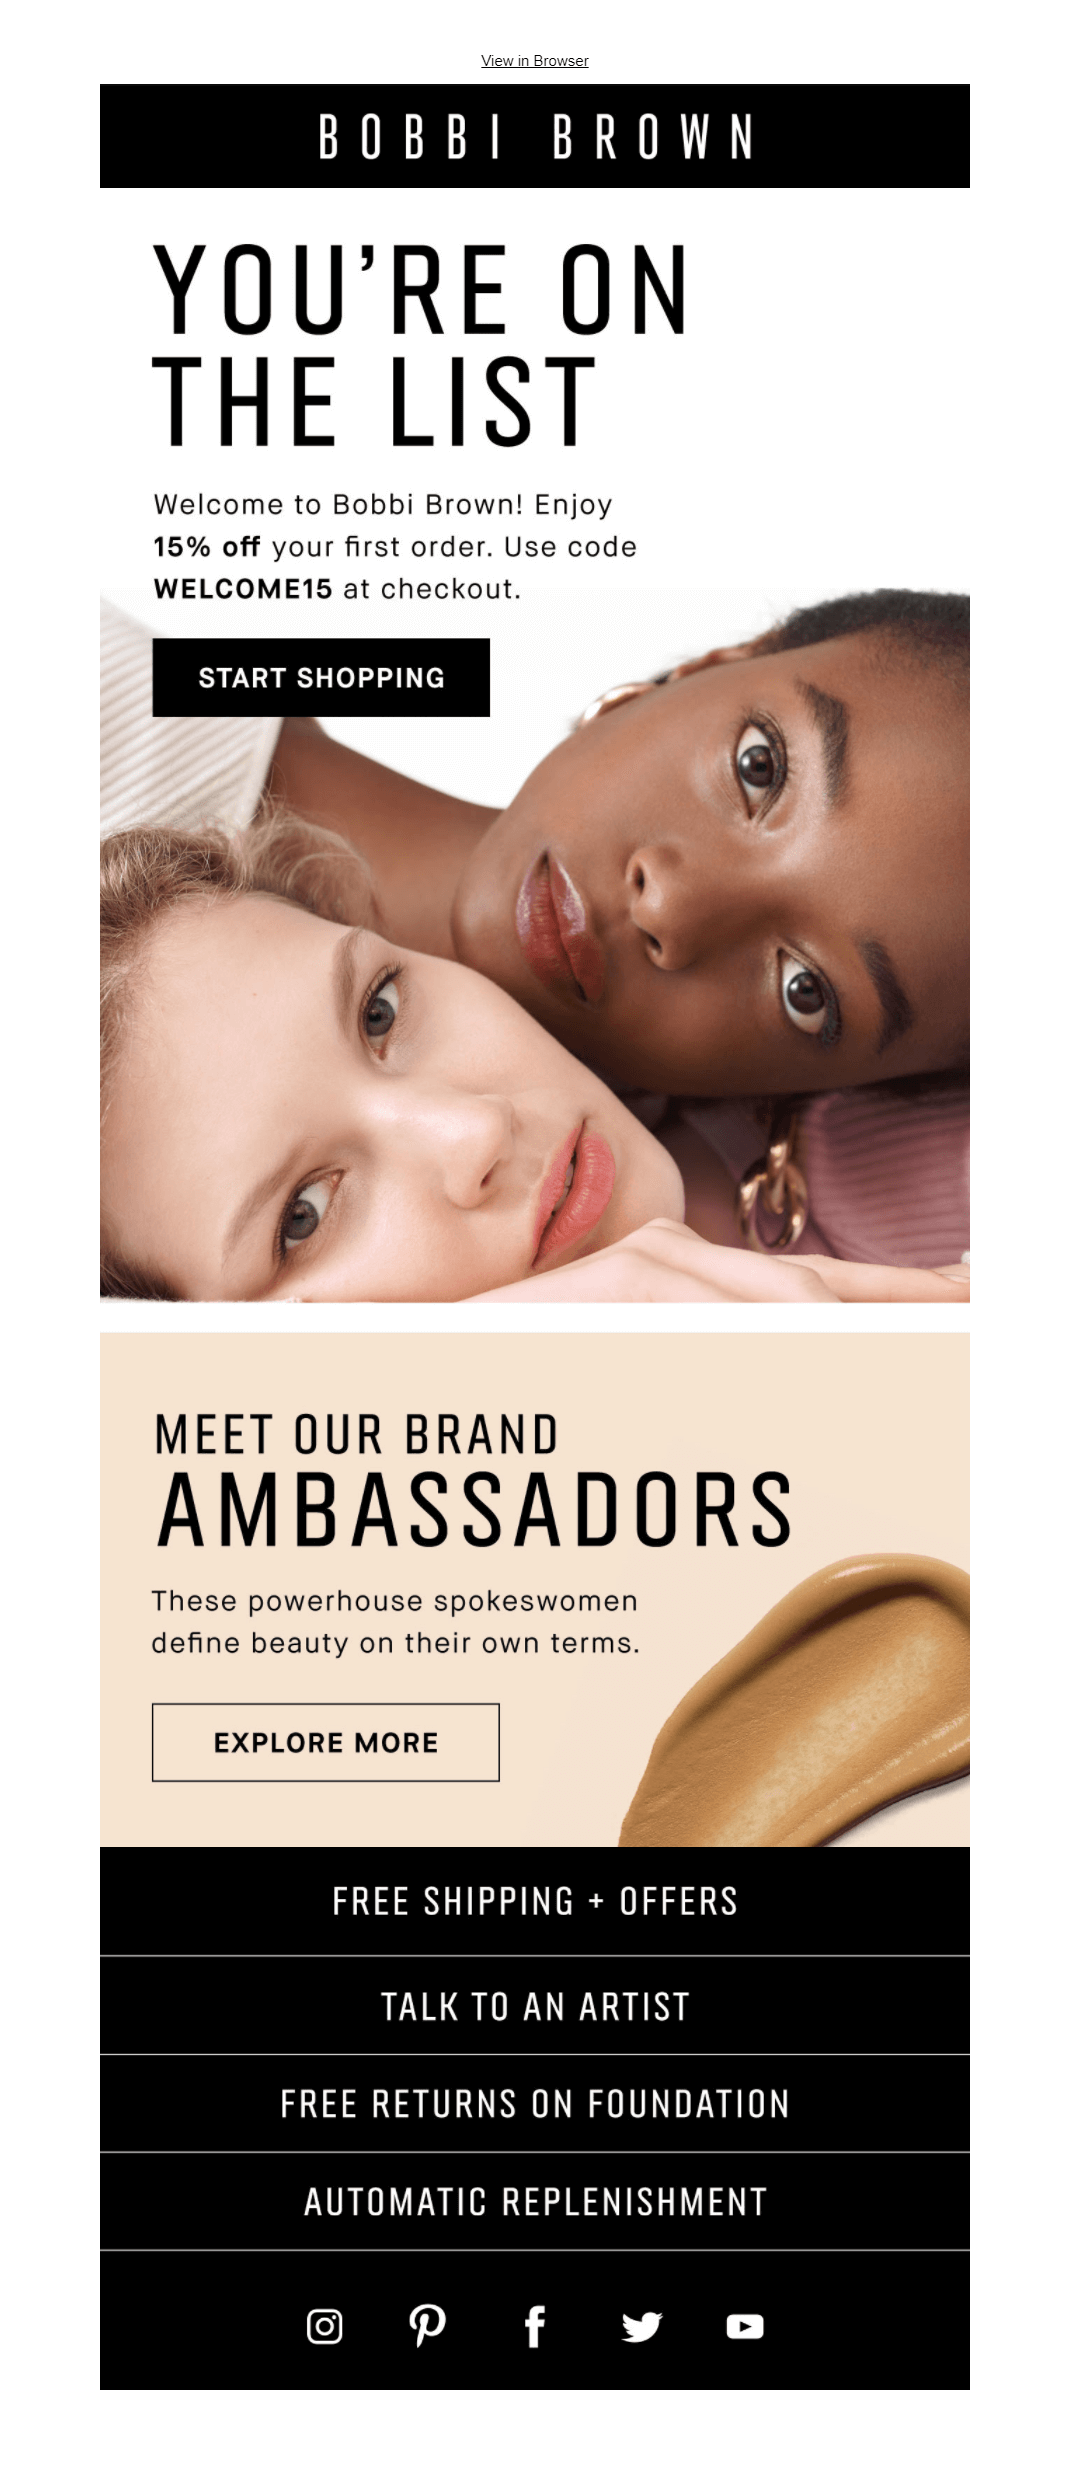 Bobbi brown welcome email campaign